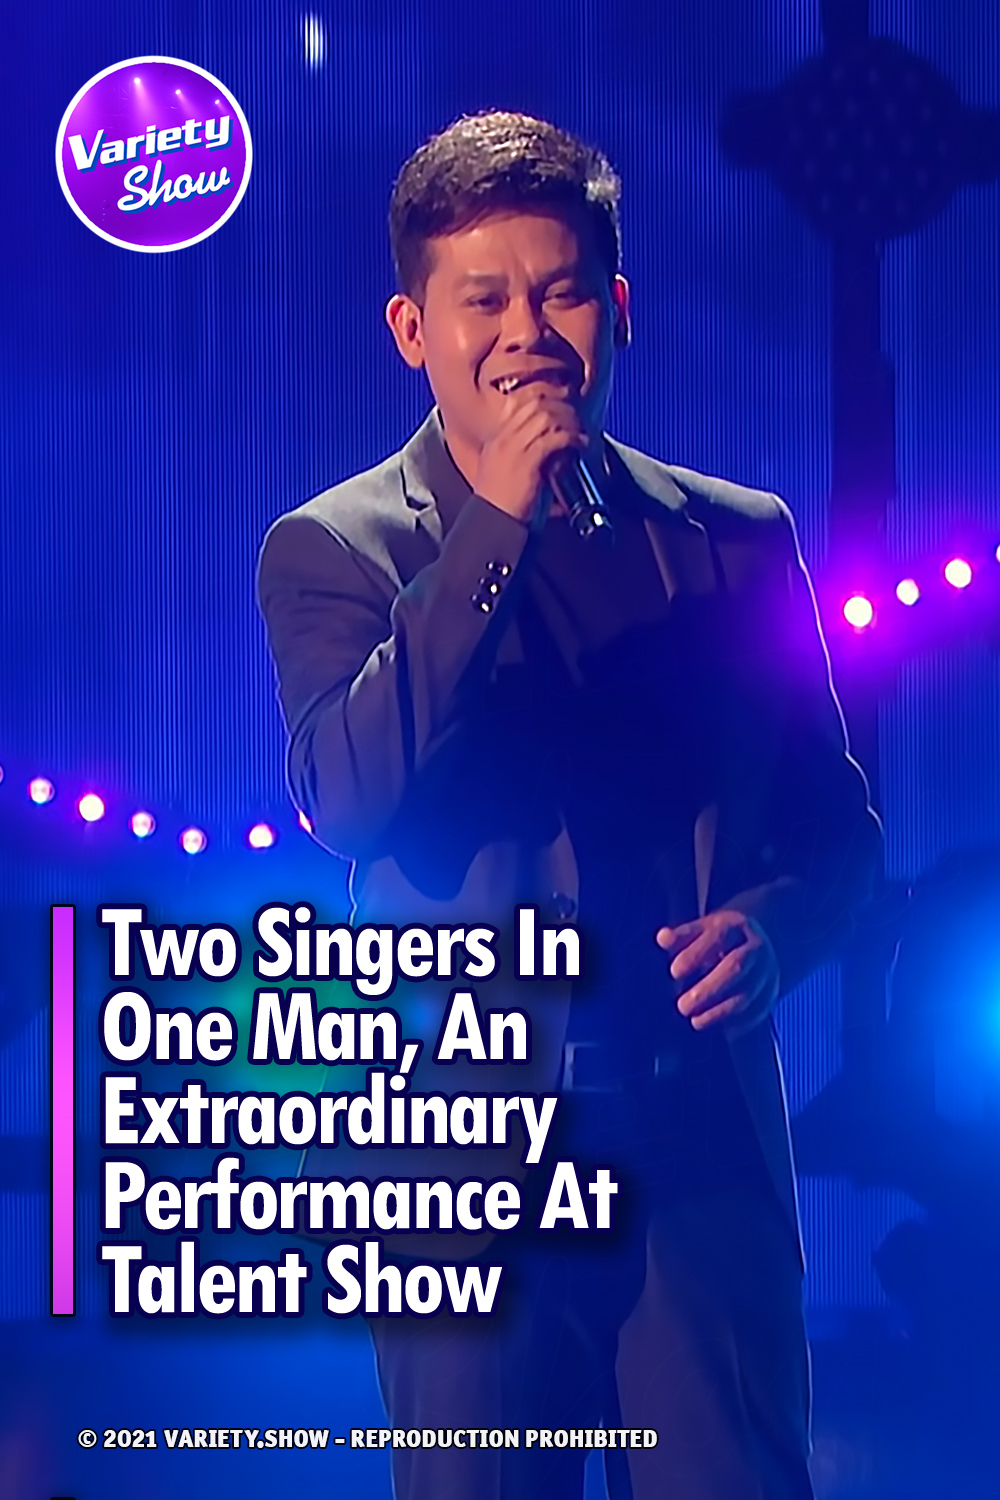 Two Singers In One Man, An Extraordinary Performance At Talent Show